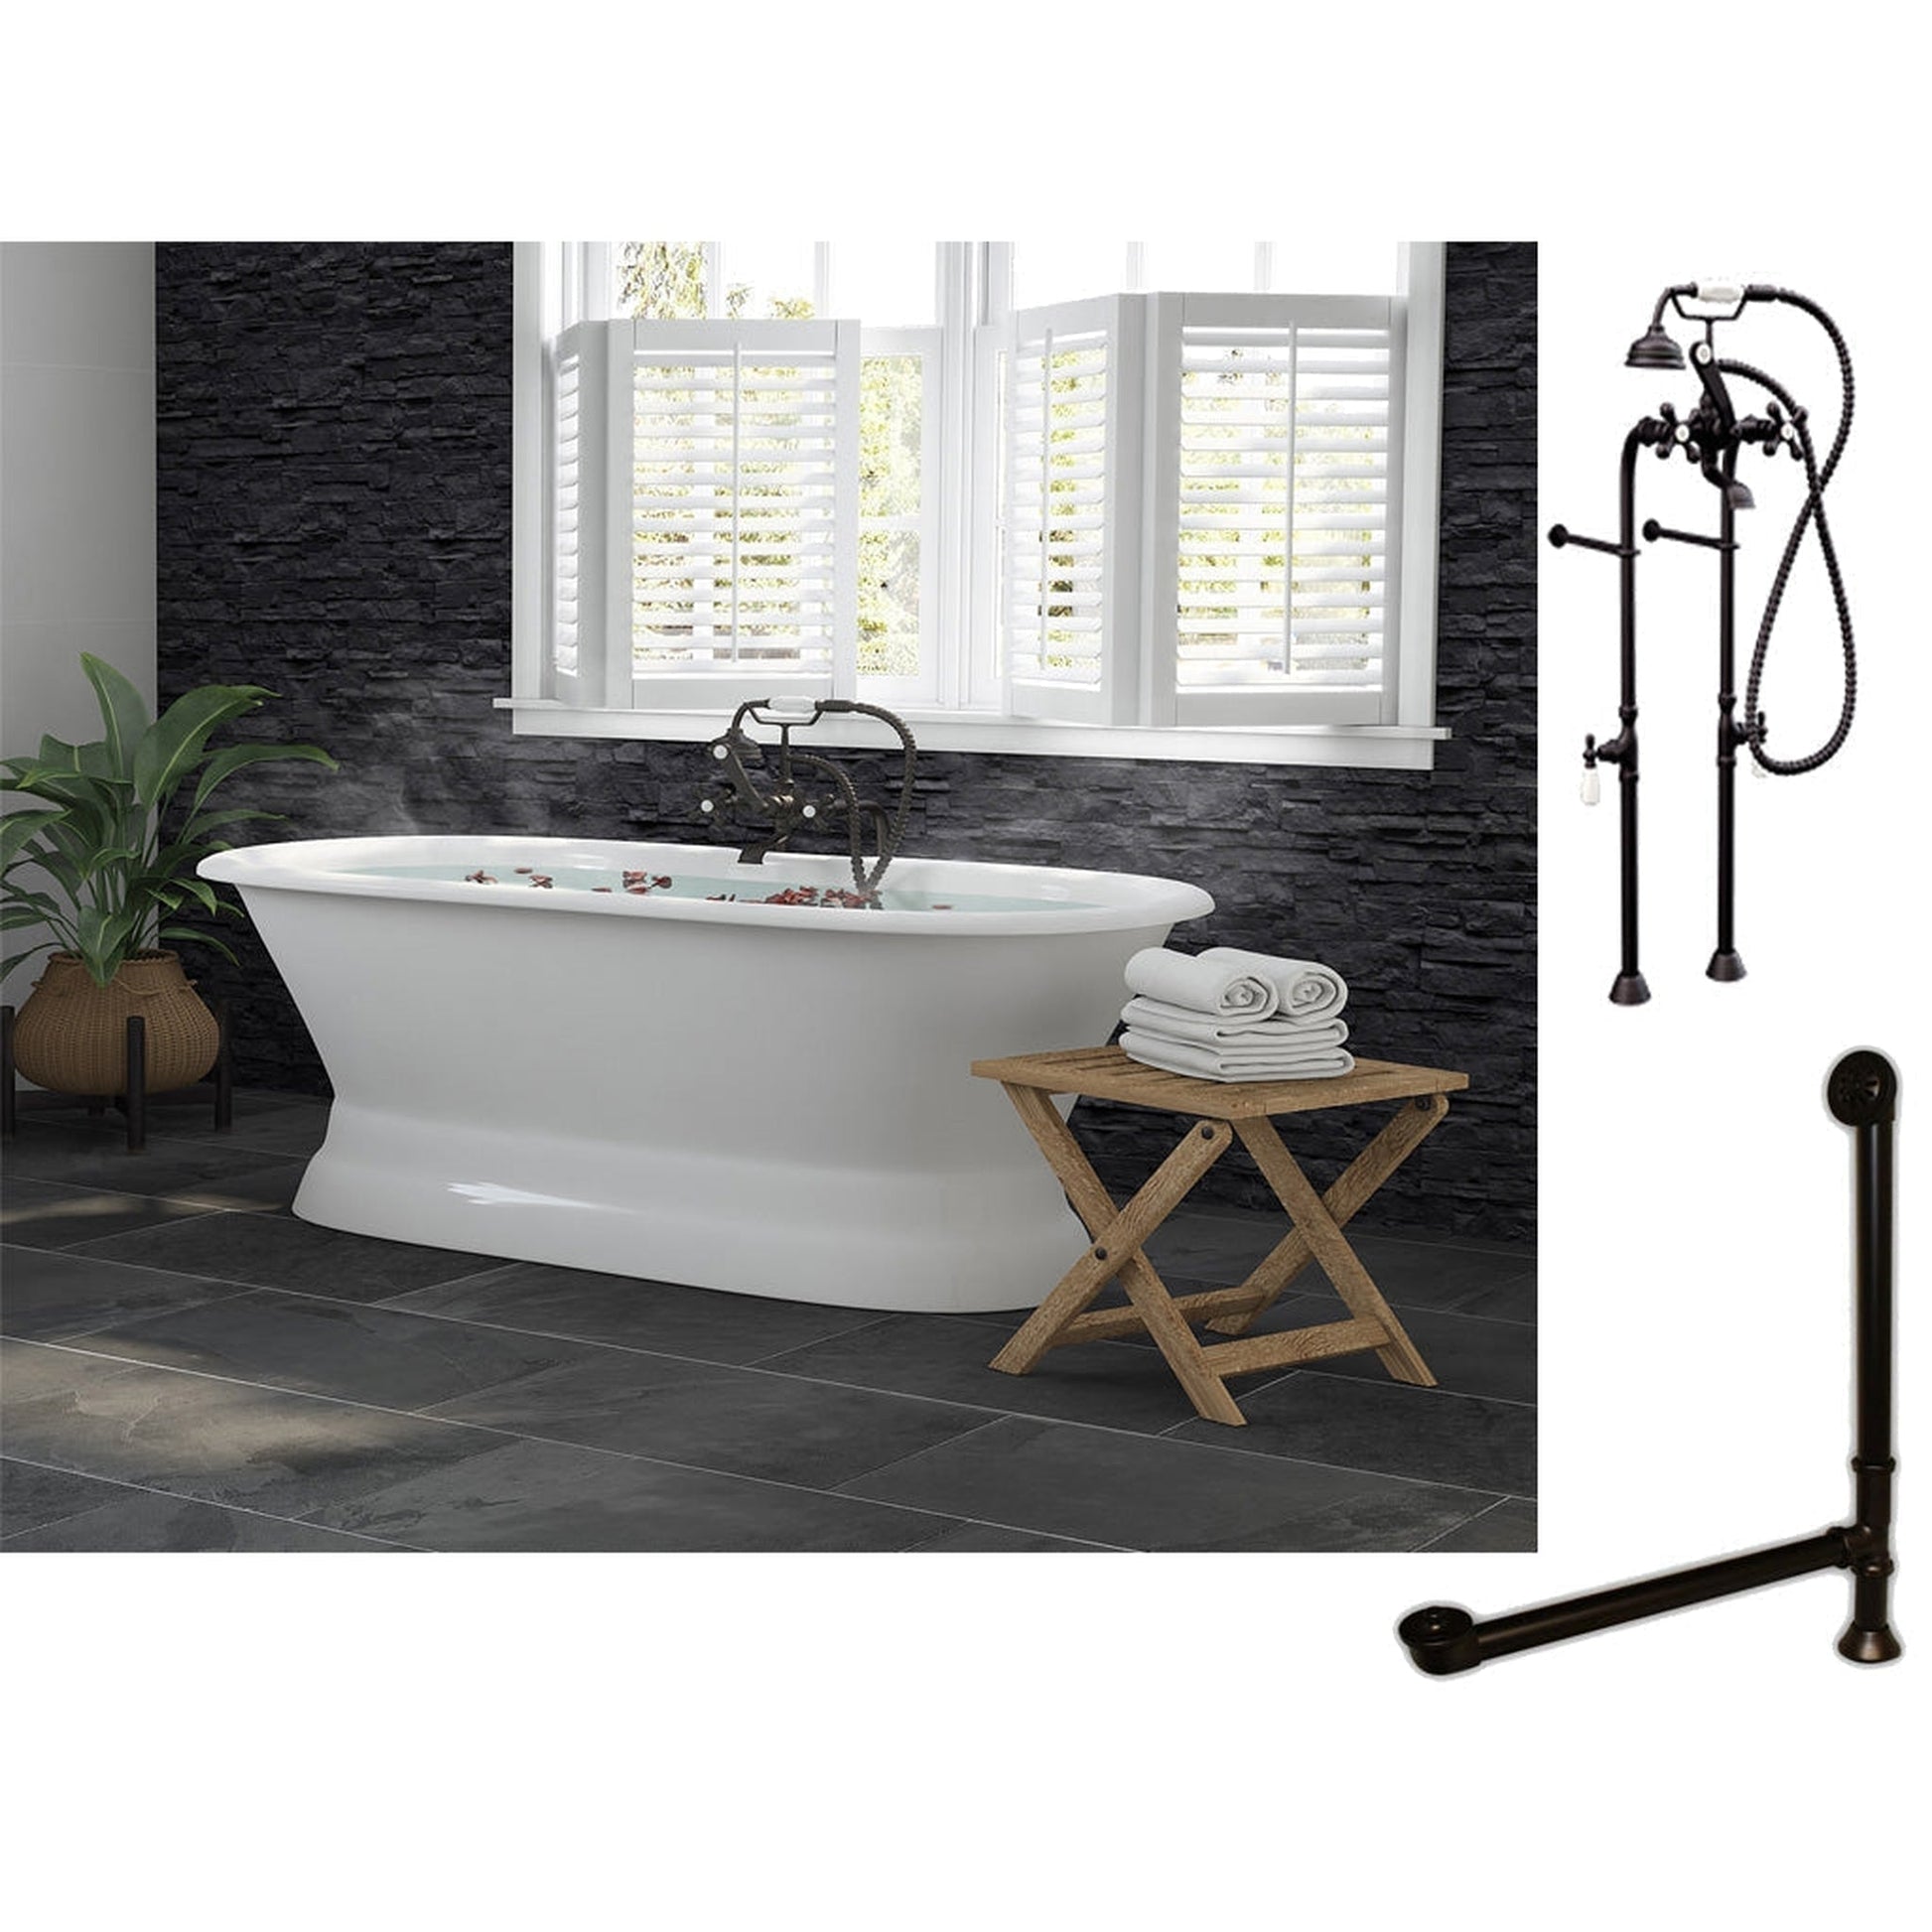 Cambridge Plumbing 60" White Cast Iron Double Ended Pedestal Bathtub With No Deck Holes And Complete Plumbing Package Including Floor Mounted British Telephone Faucet, Drain And Overflow Assembly In Oil Rubbed Bronze